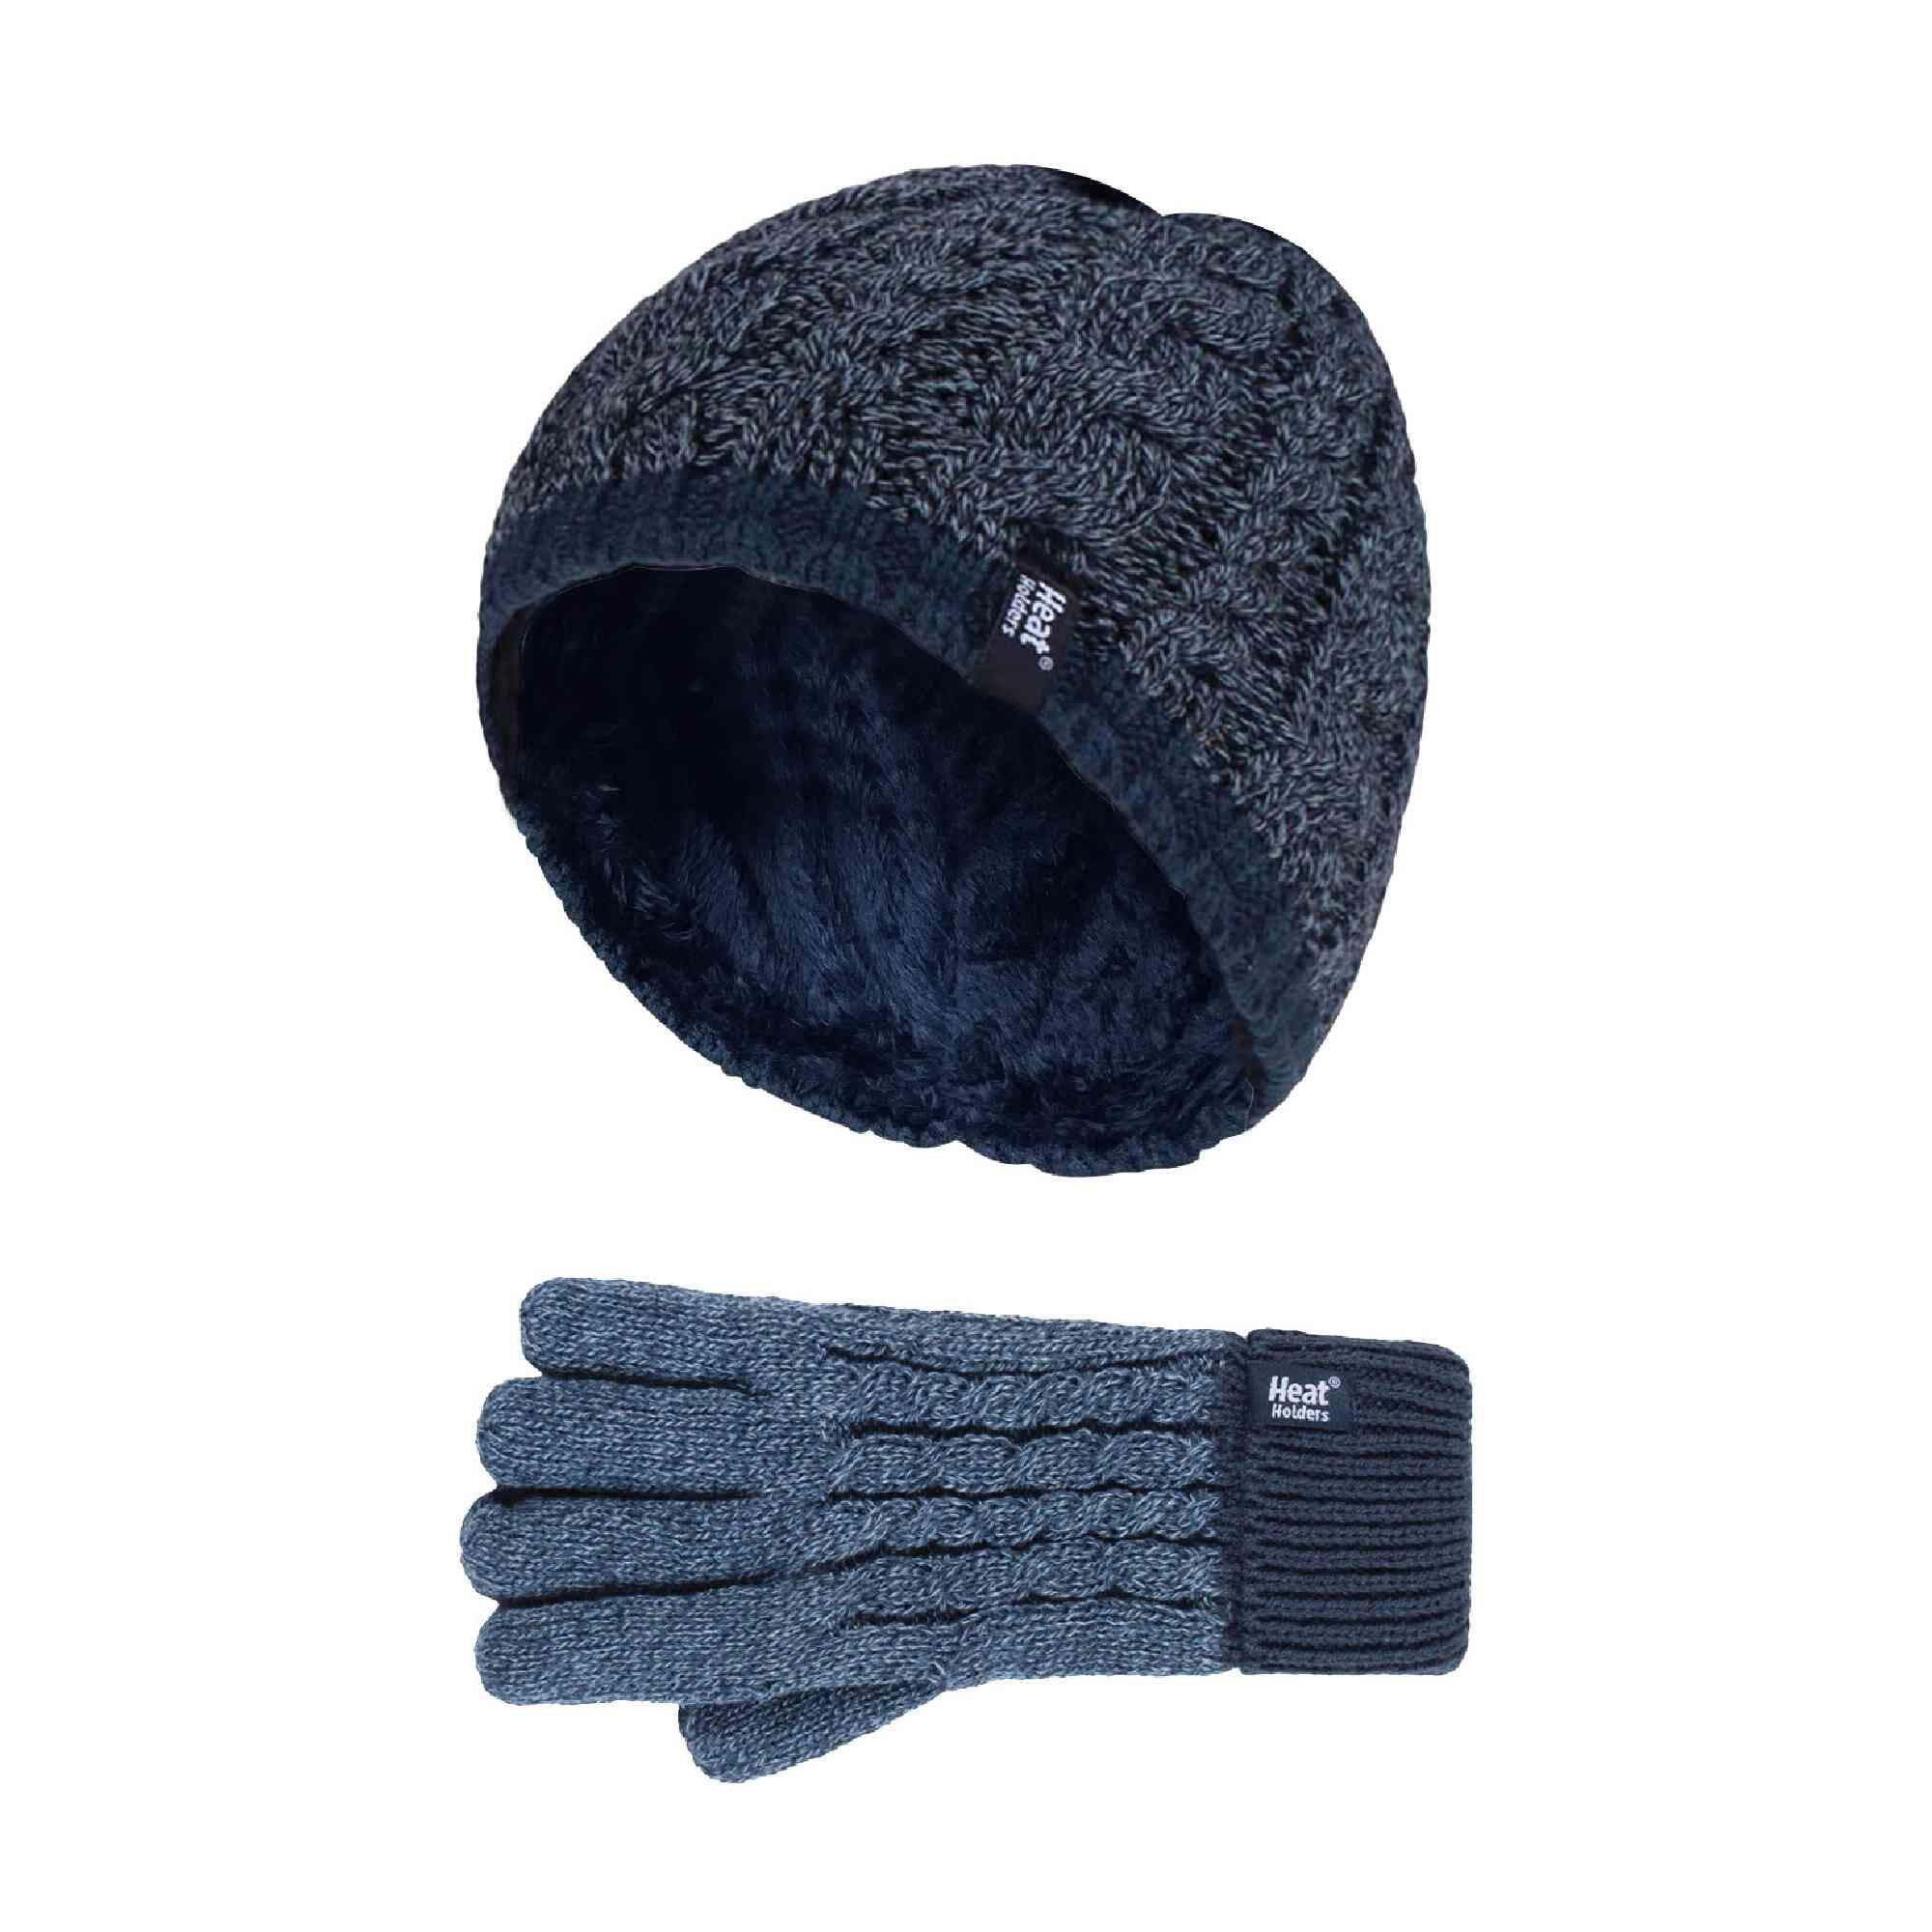 HEAT HOLDERS Boys Kids Cable Knit Warm Fleece Lined Thermal Winter Hat and Gloves Set